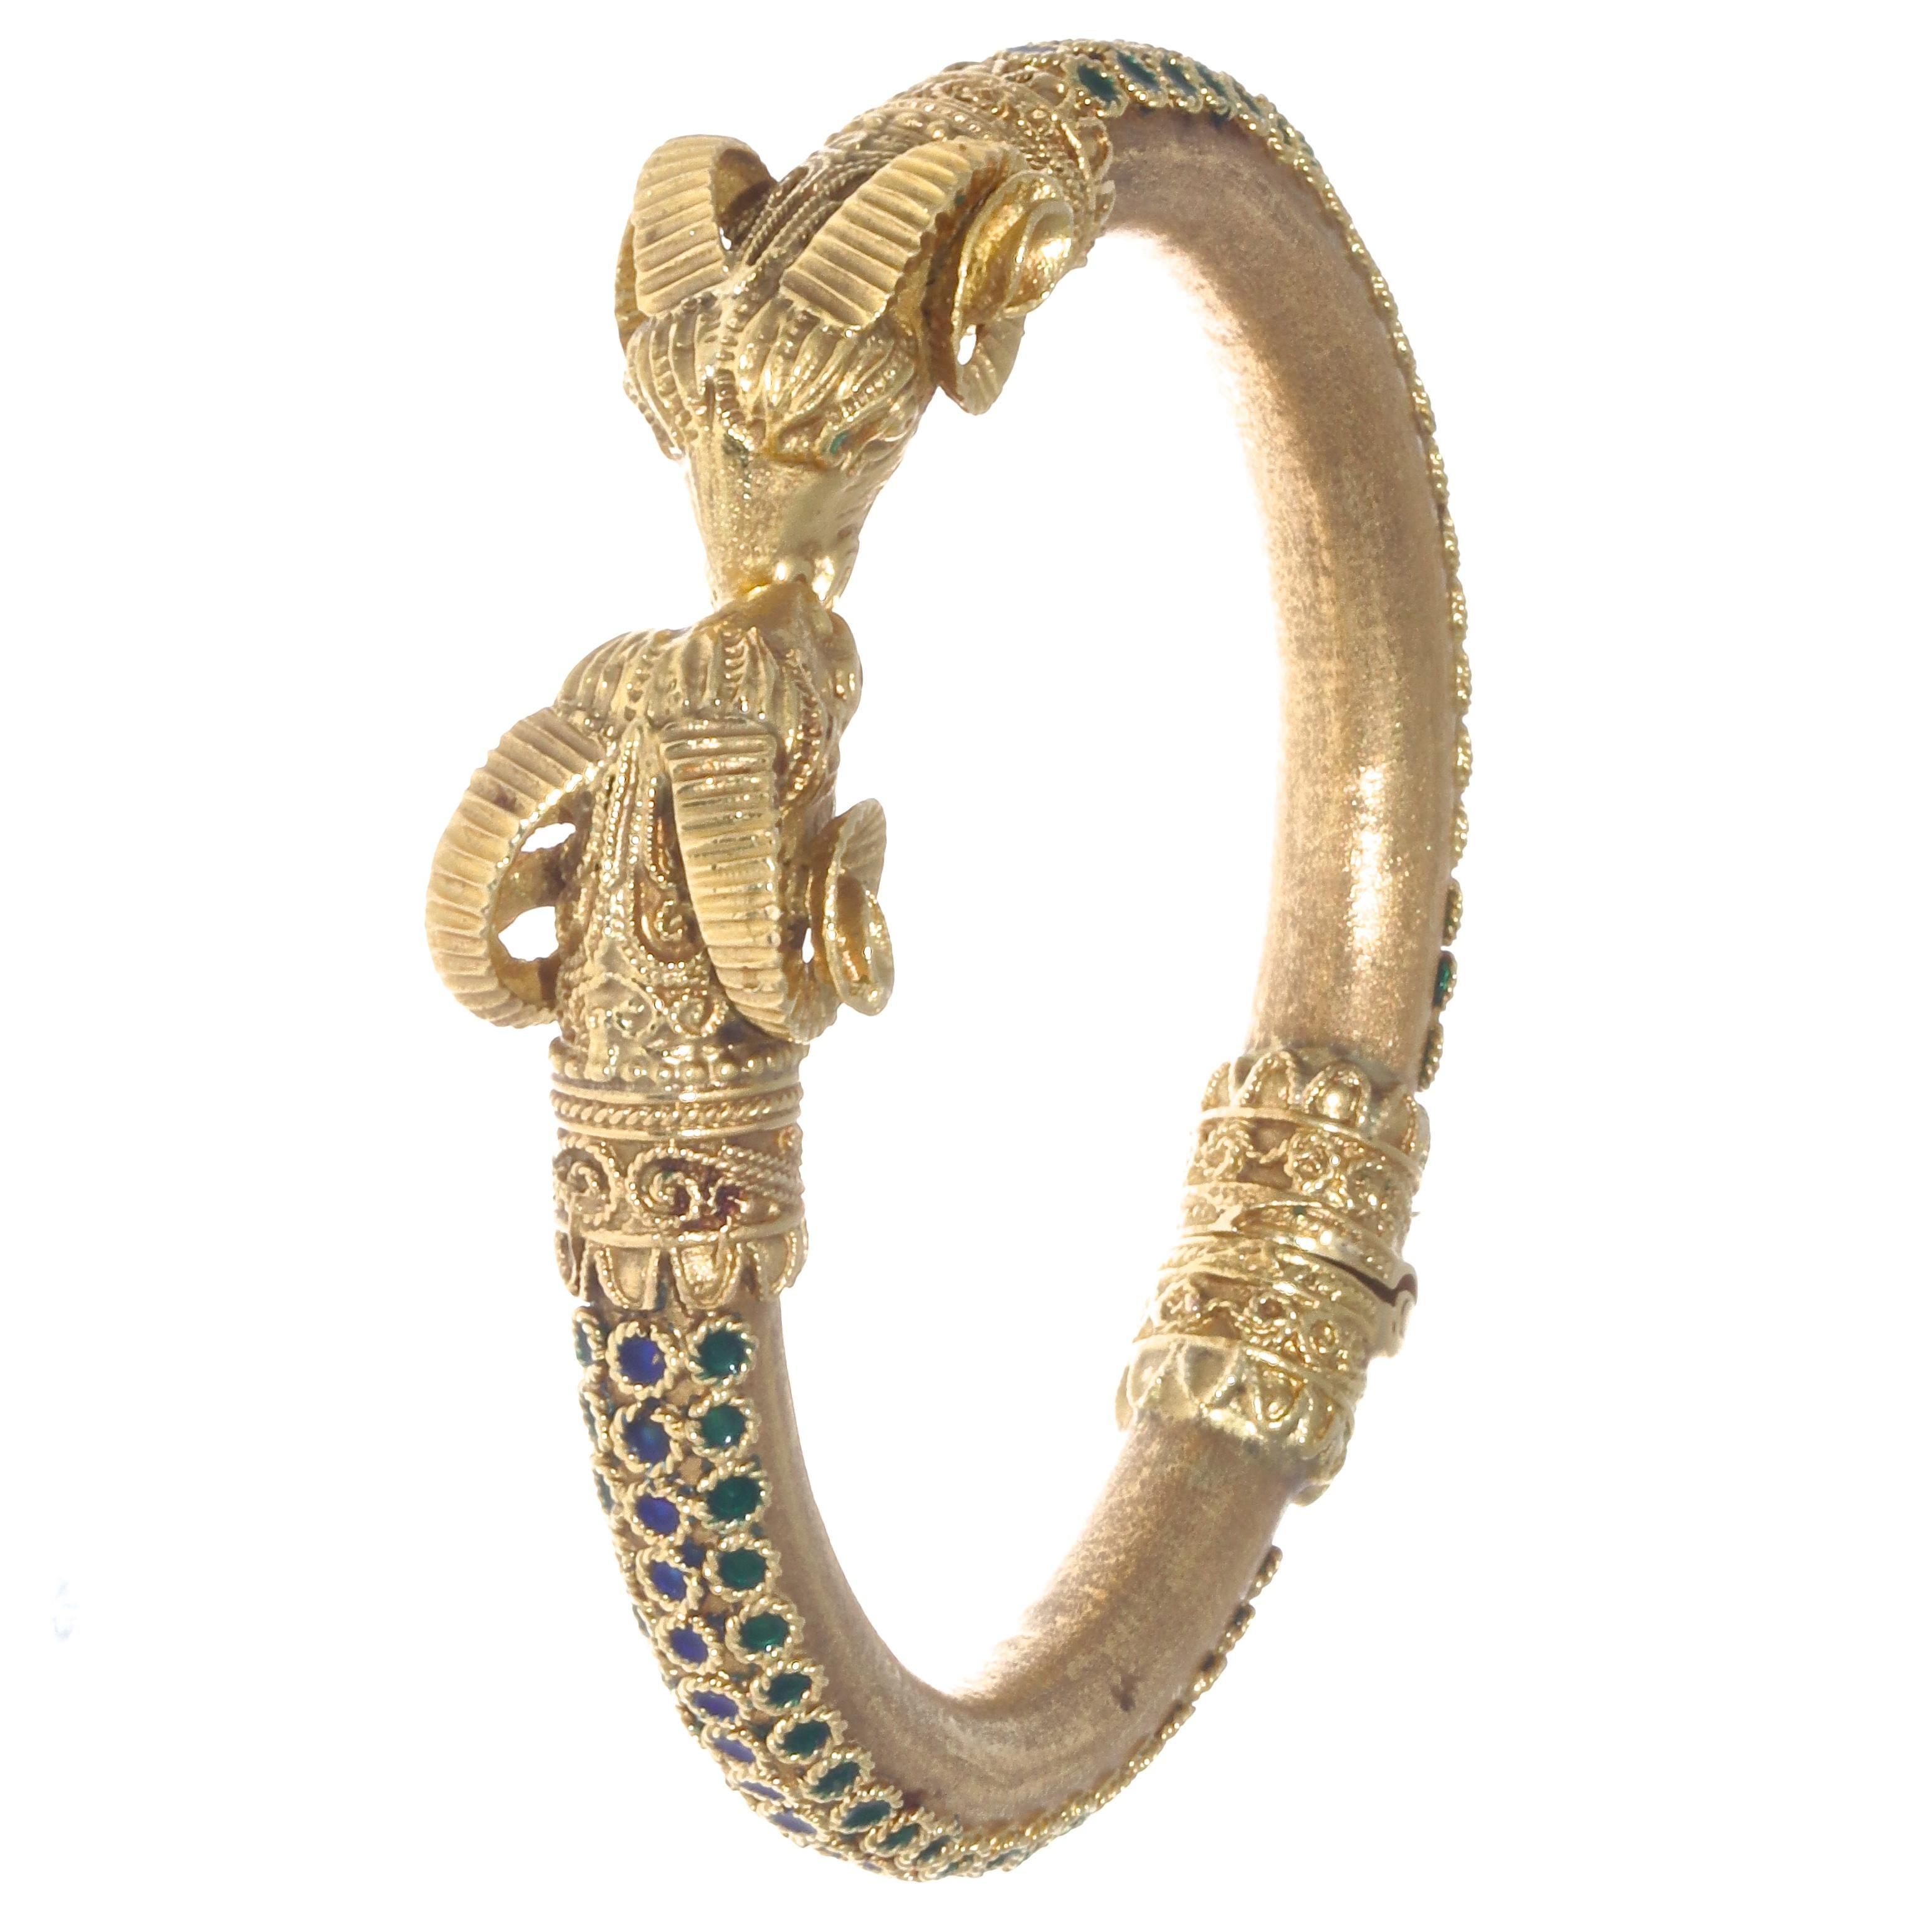 Are you attracted to mythical creatures? Consider this stunning Etruscan ram bracelet. Etruria is an ancient country that existed around 7th century BC. It was located where Tuscany, Italy is now. Etruscans often used rams in their arts. The